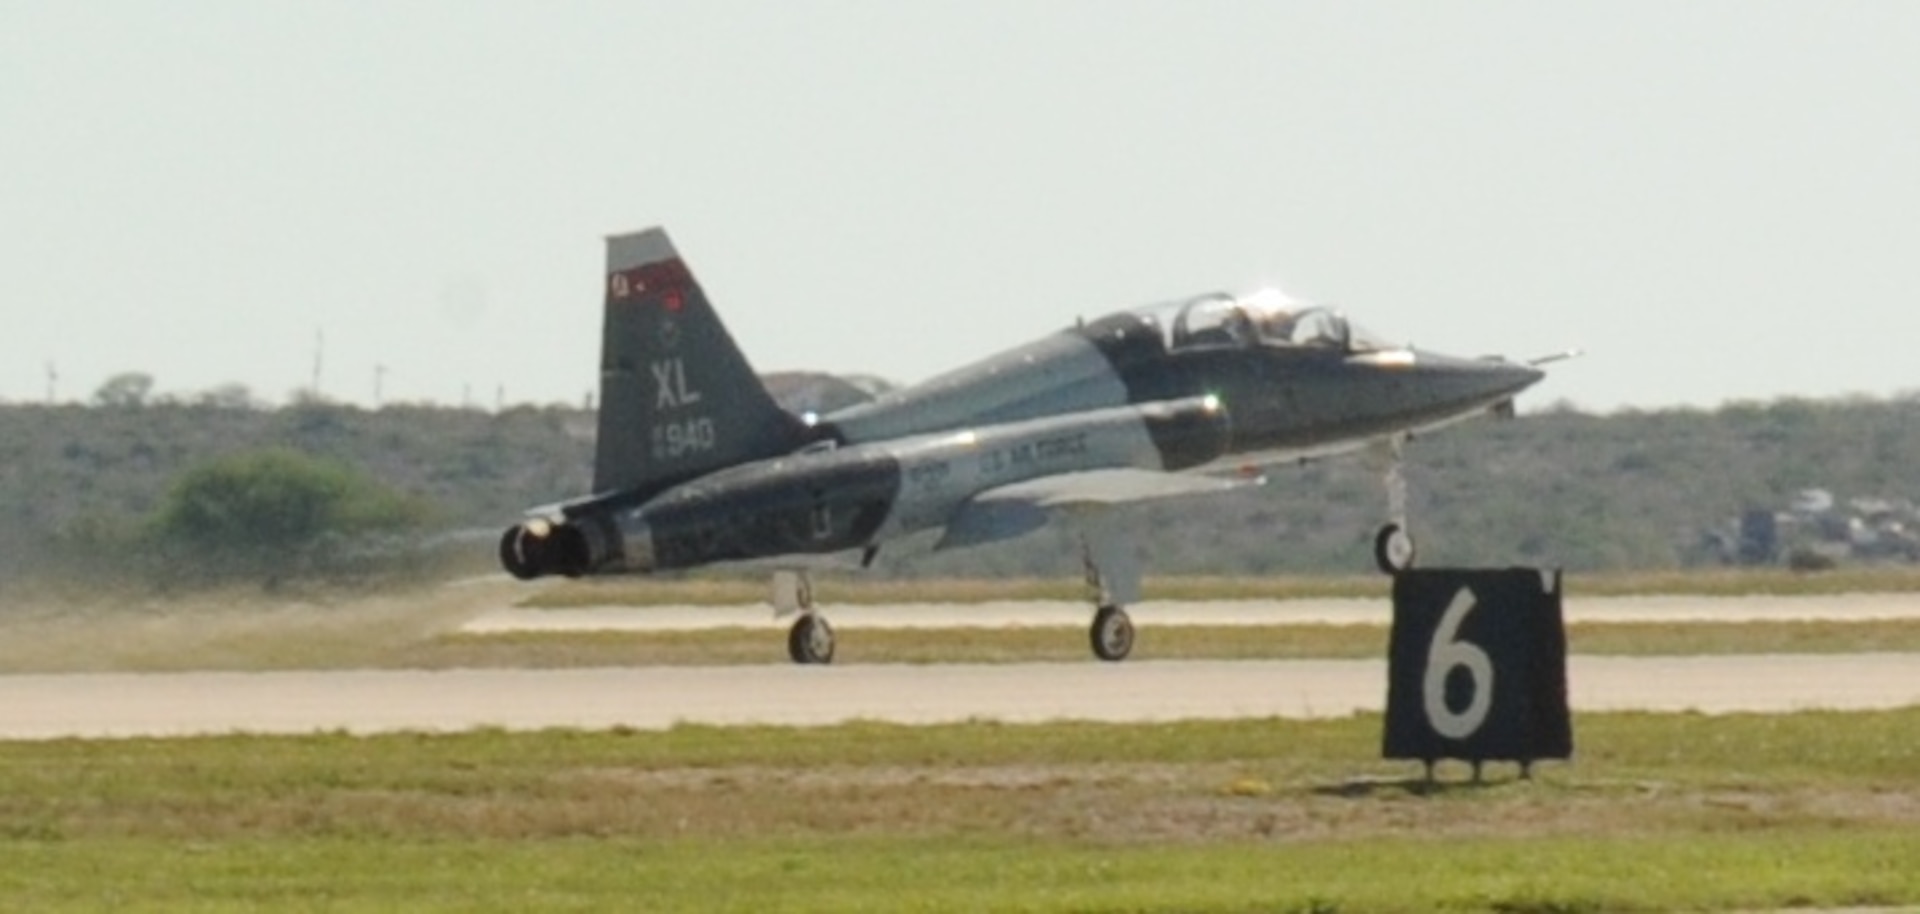 A 434th Fighter Training Squadron T-38C Talon jet bound for Randolph Air Force Base, Texas takes off from Laughlin Air Force Base, Texas, Oct. 4.  The jet is one of two of the first jets to be transferred to the 435th Fighter Training Squadron at Randolph as part of the consolidation of the Introduction to Figher Fundamentals training course.  Due to the consolidation, the 435th FTS will receive a total of 20 T-38Cs, 11 active duty instructor pilots, more than 30 support positions, and 80 additional students annually.  (U.S. Air Force Photo by Senior Airman Blake Mize)